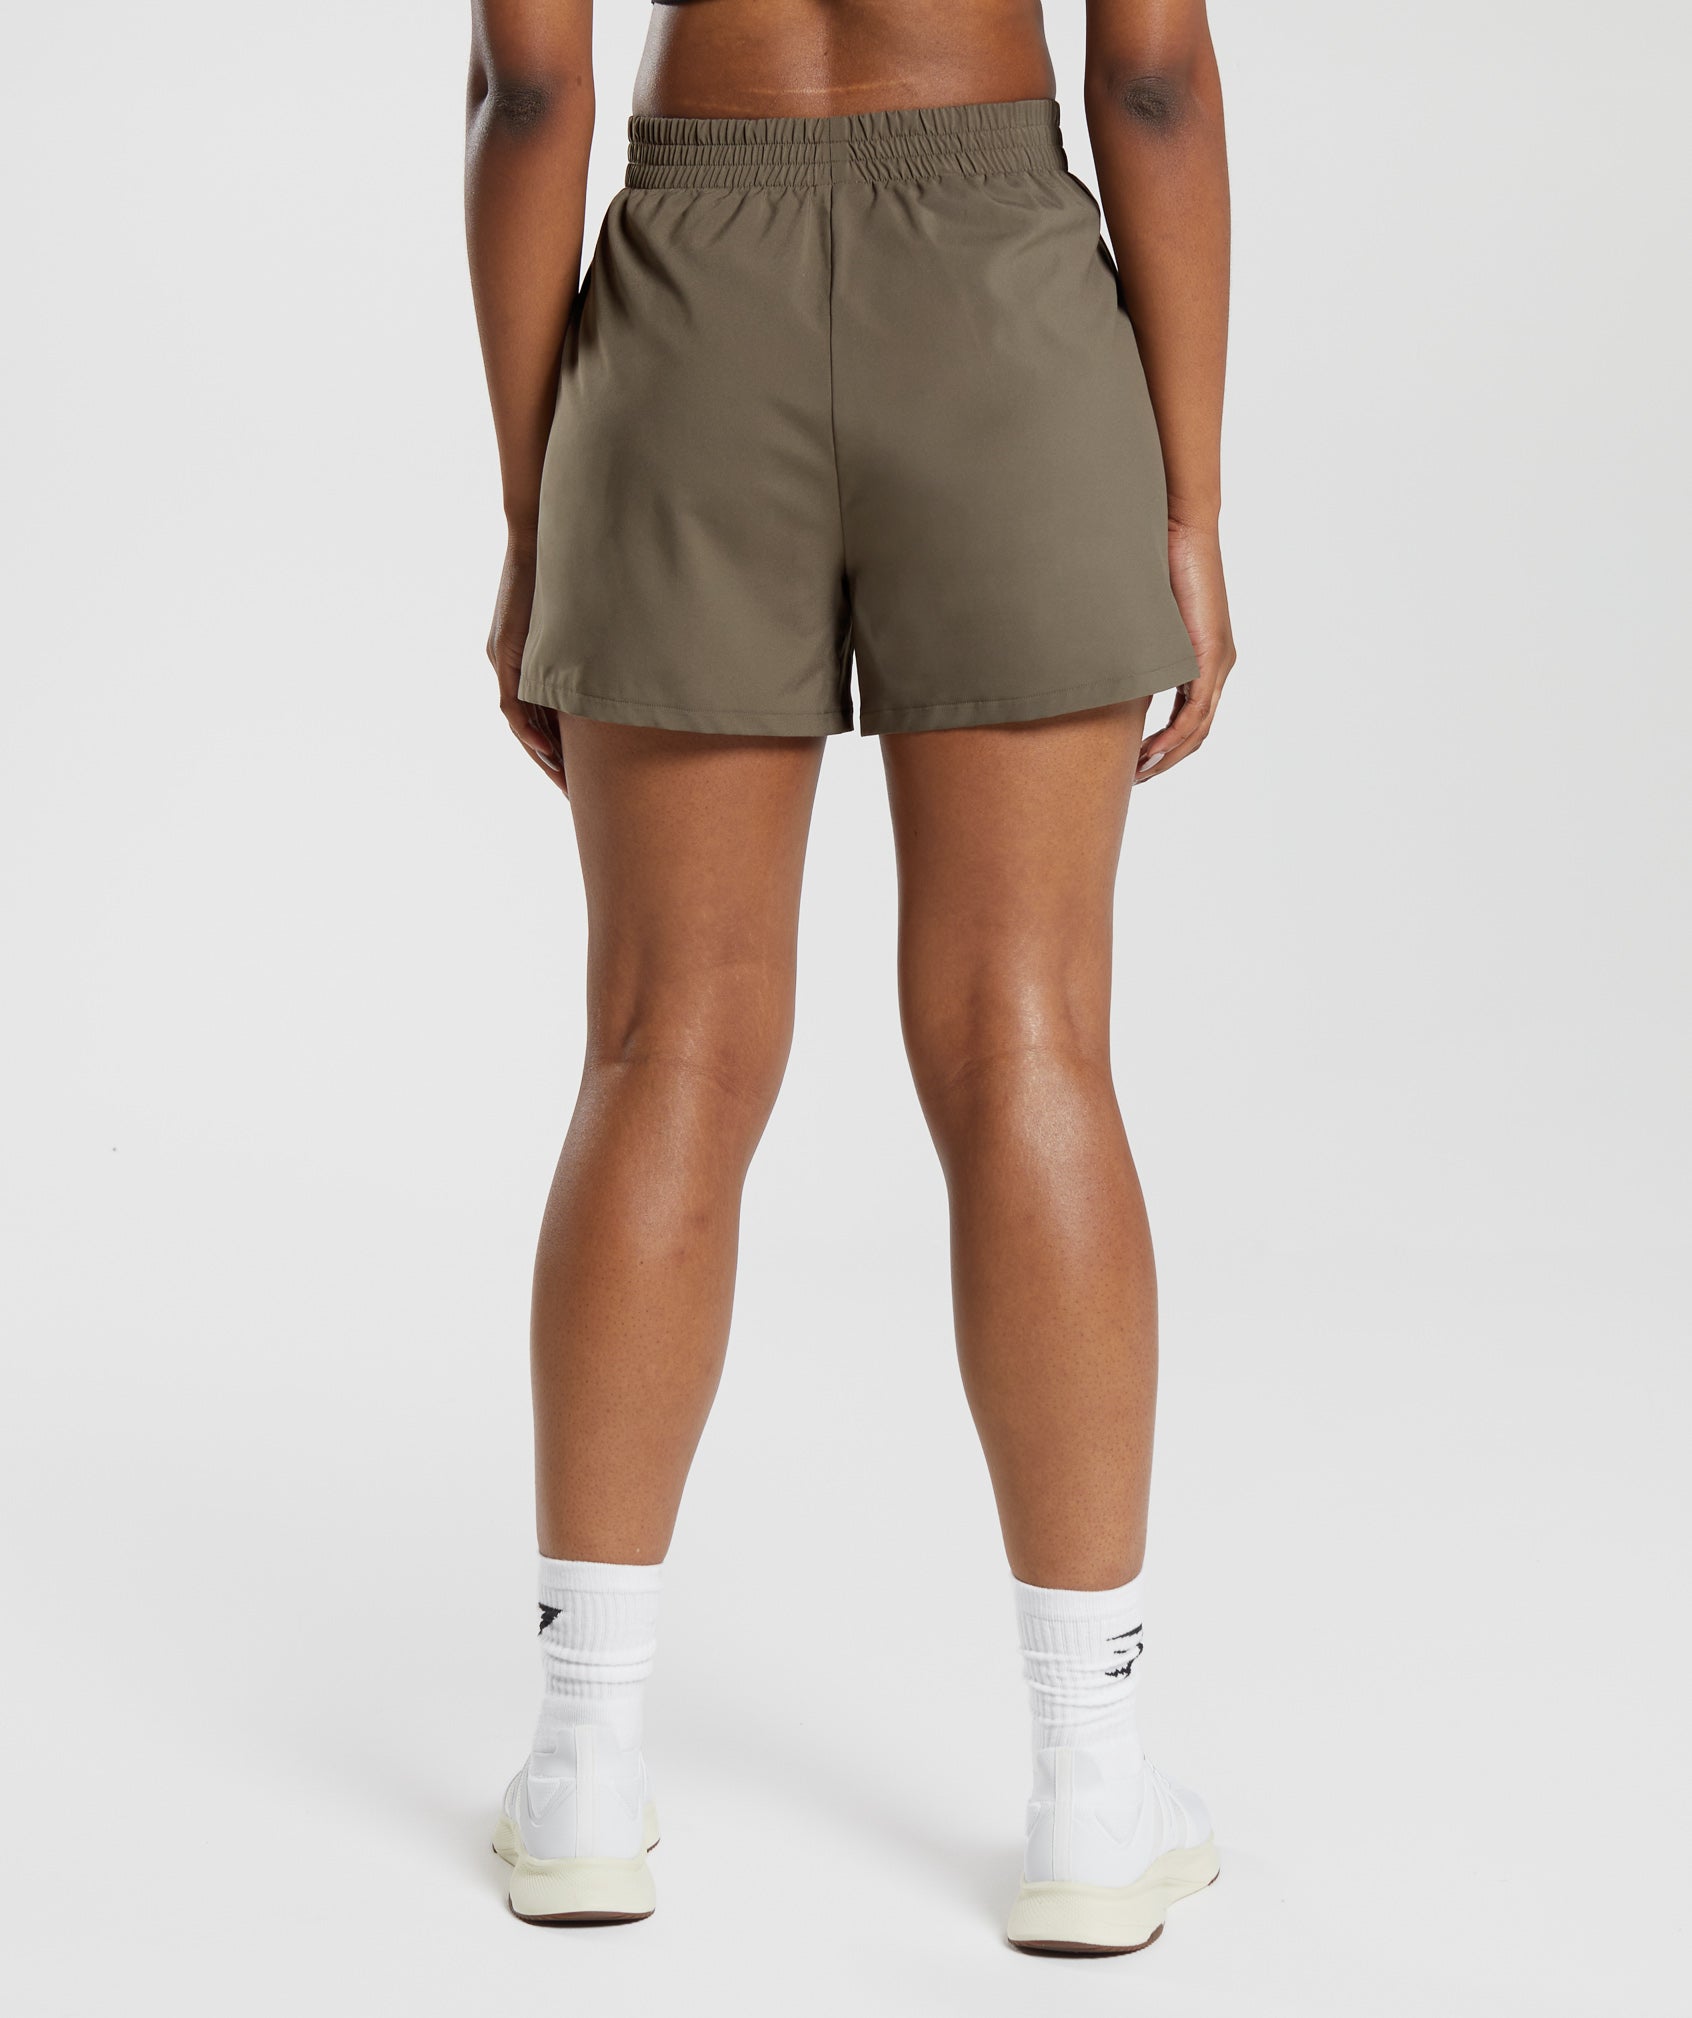 Woven Pocket Shorts in Camo Brown - view 2